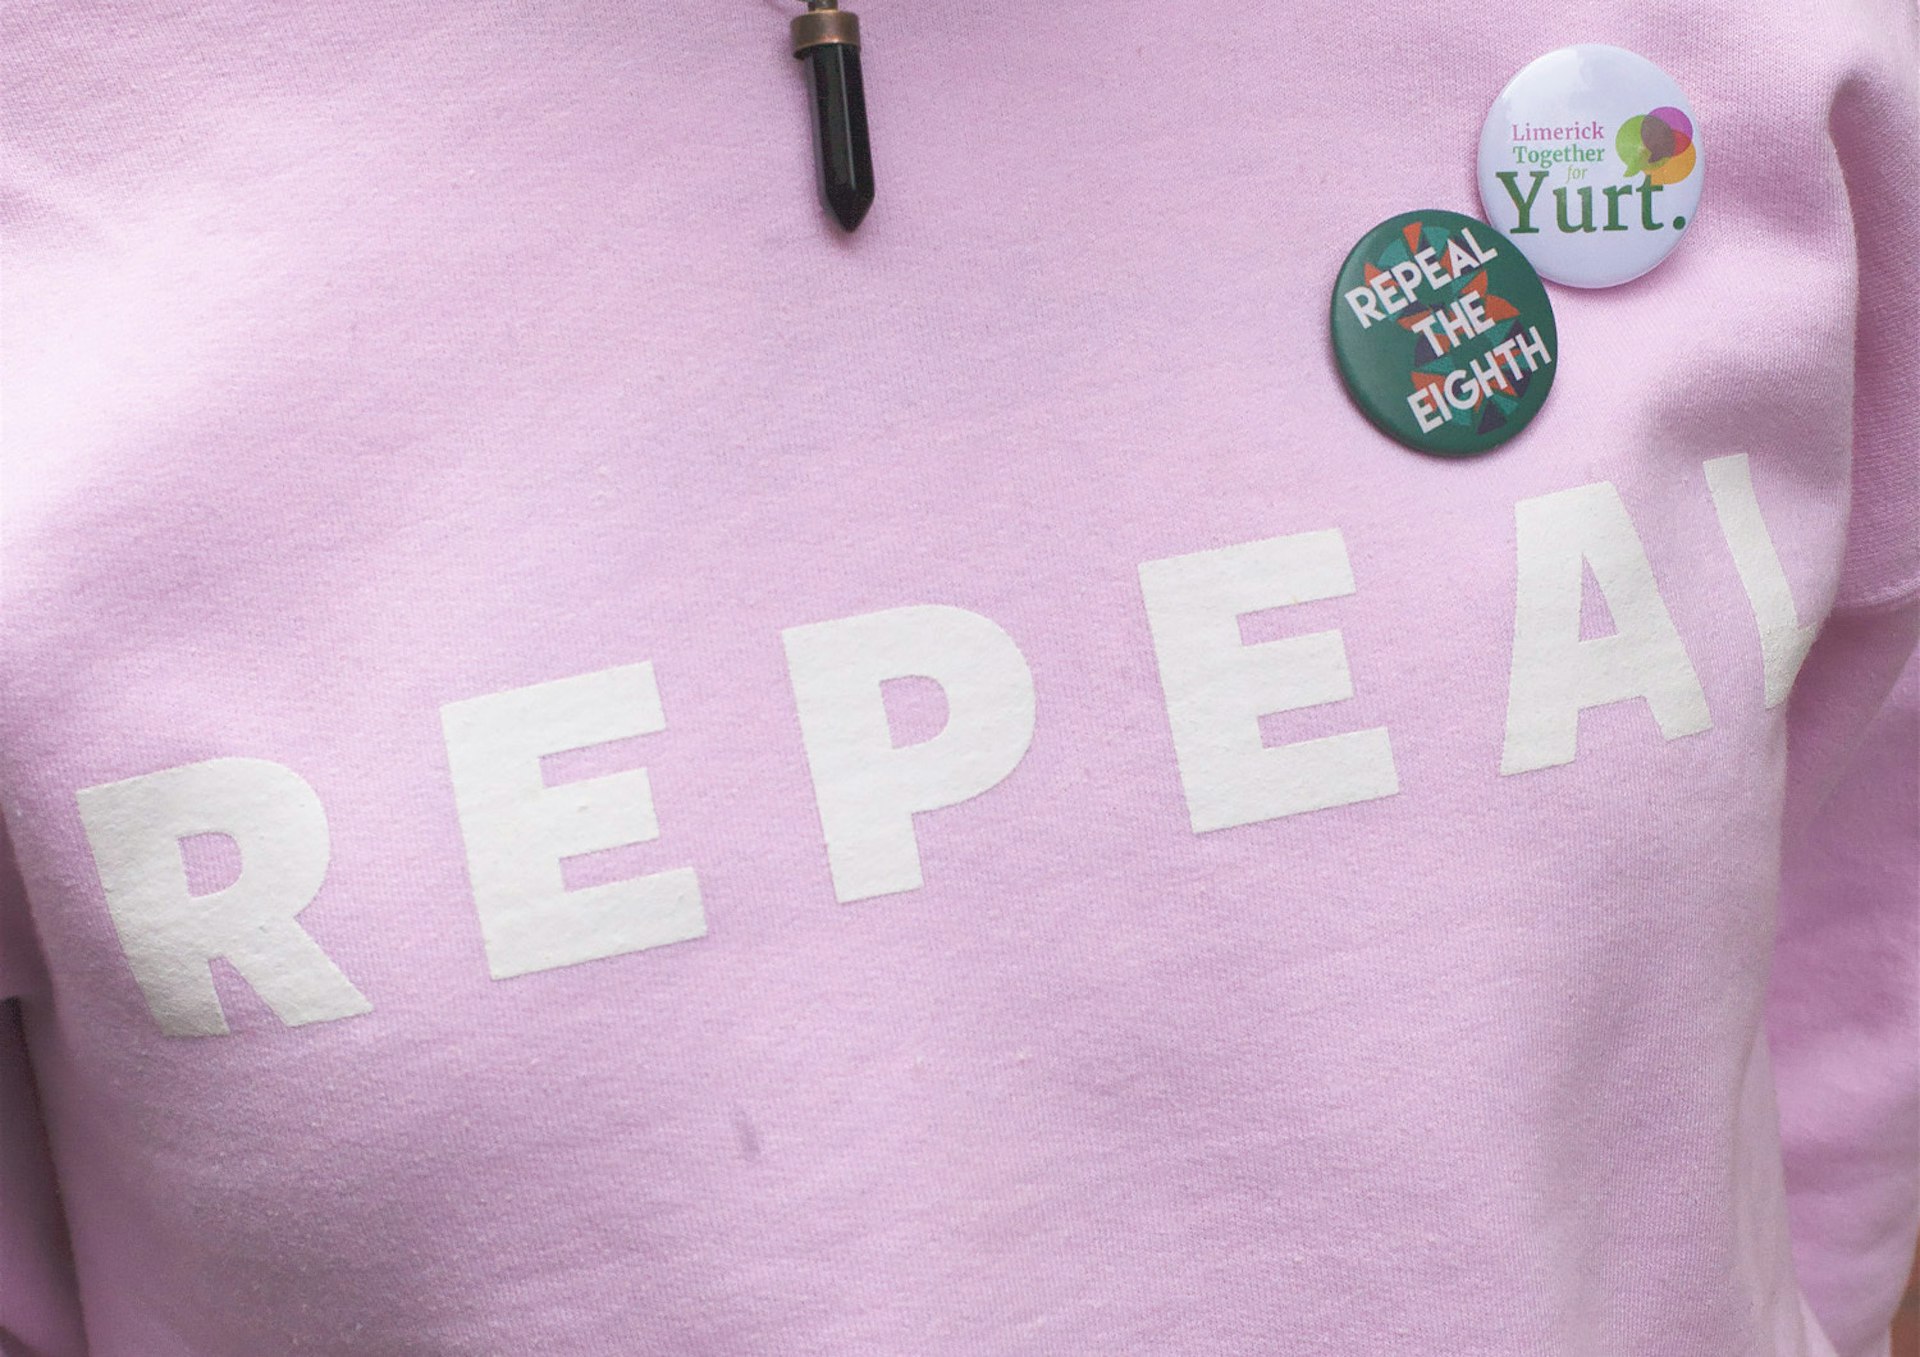 Ireland voted to repeal the 8th – so what happened next?